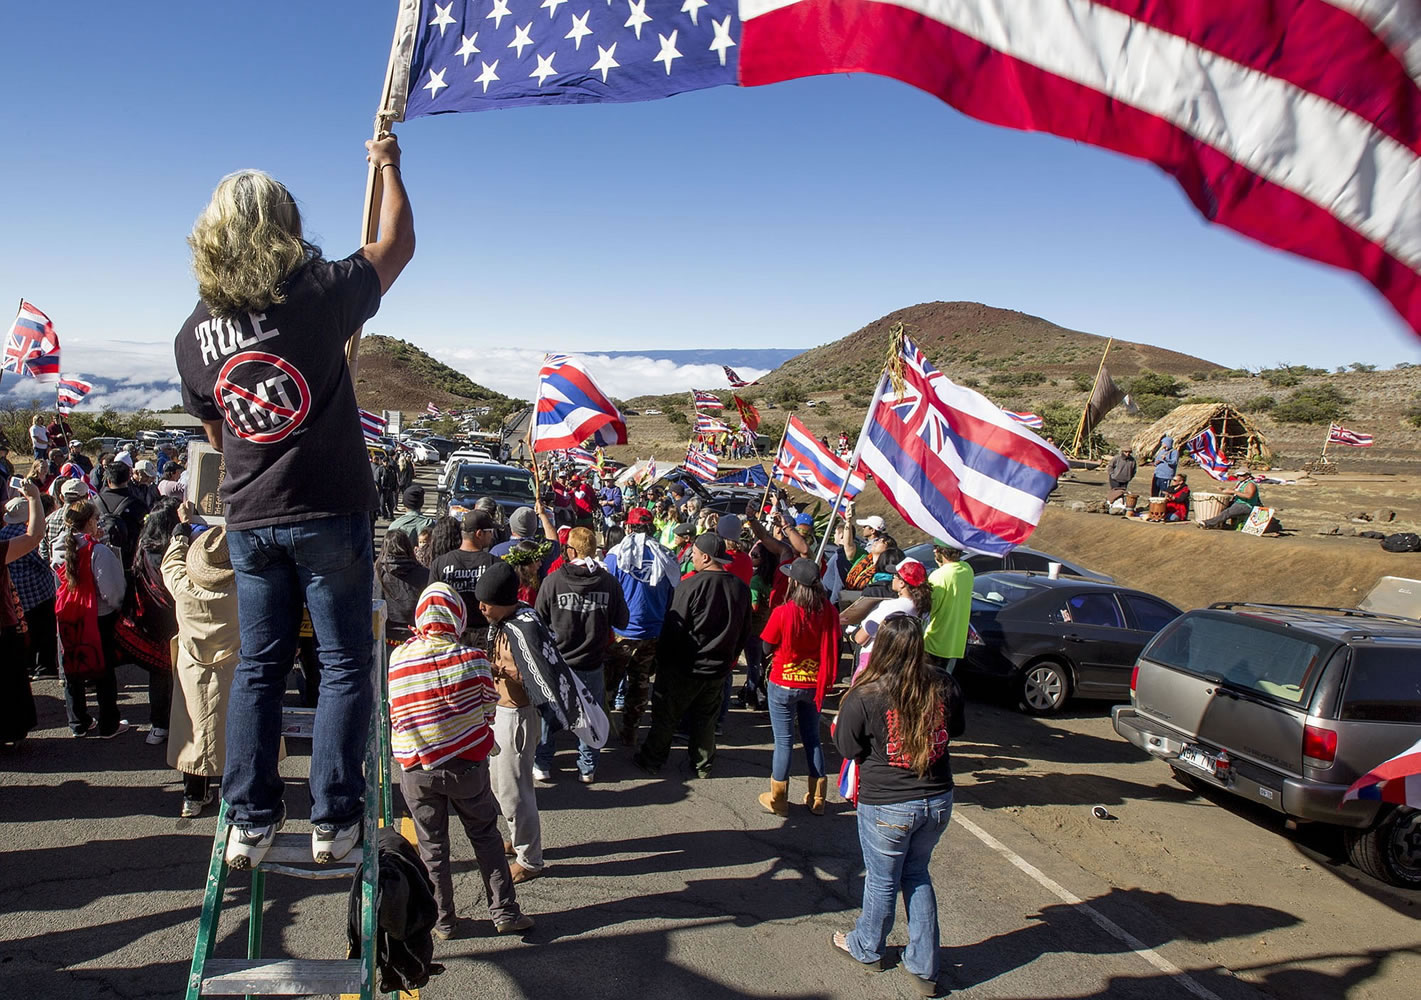 In this photo taken on Wednesday, June 24, 2015, Thirty Meter Telescope protesters walk on a road during the first of many blockades that started at the Mauna Kea visitors center, stopping TMT construction vehicles from driving up to the summit of the mountain, about 40 miles west of Hilo, Hawaii. Hundreds of protesters on the Hawaii mountain road erupted in cheers Wednesday after construction crews turned around and retreated from the site for what would be one of the world's largest telescopes.